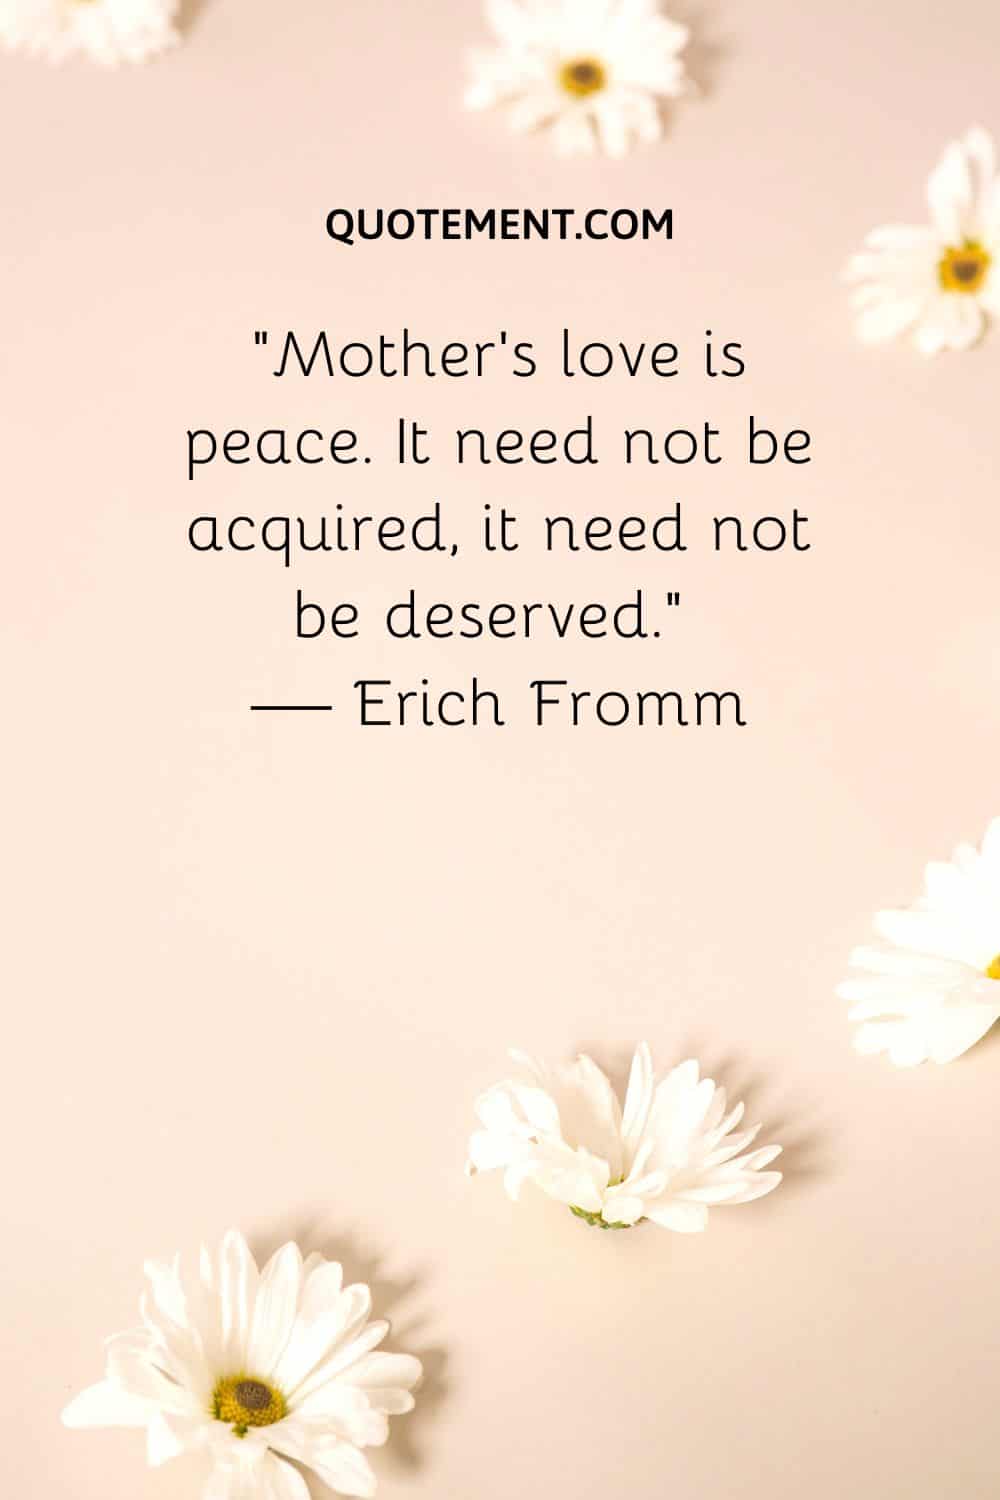 Mother’s love is peace. It need not be acquired, it need not be deserved